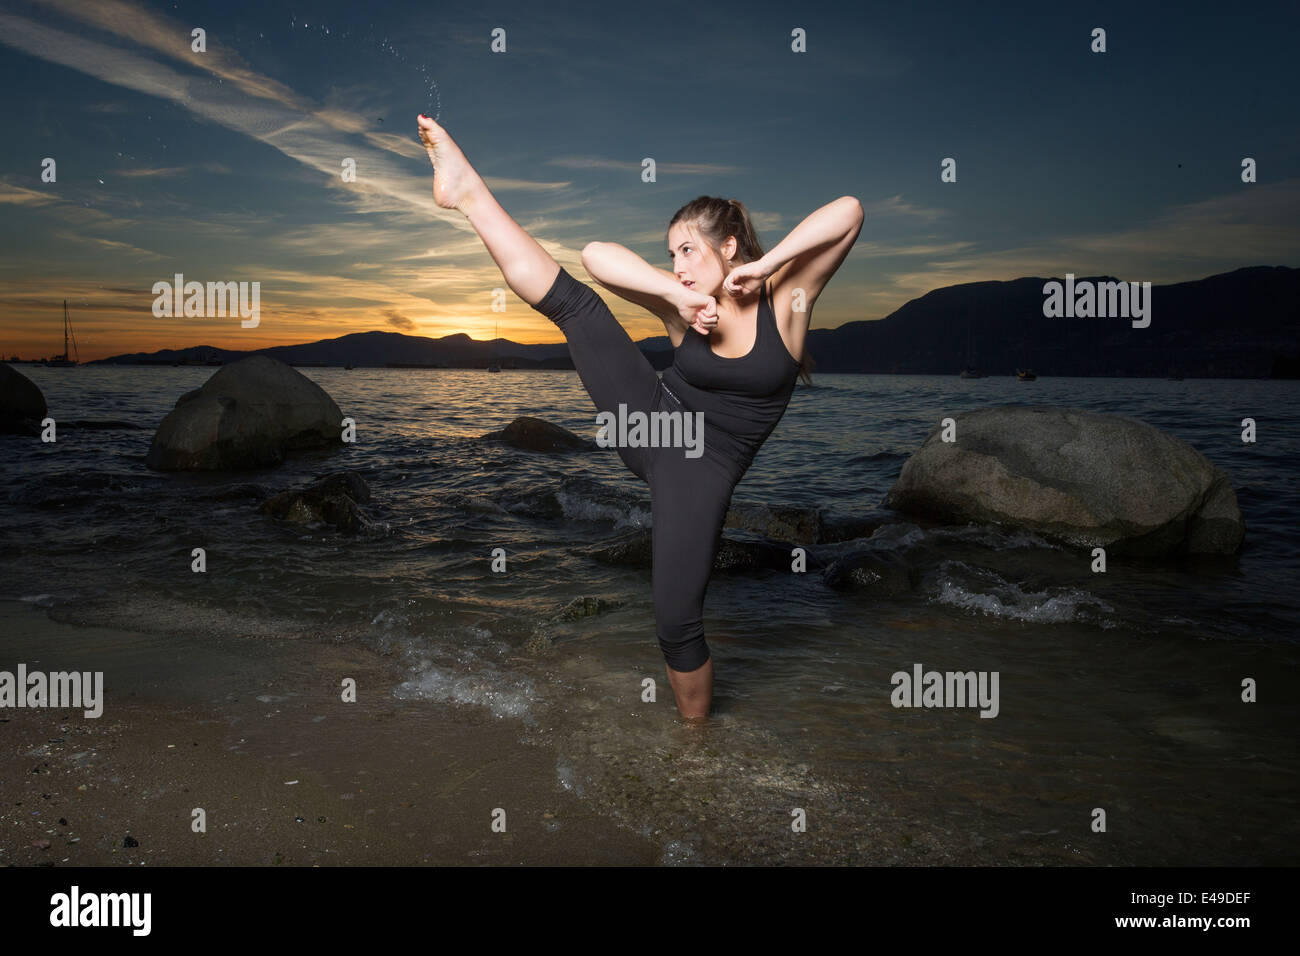 A young woman performs a high gymnastic kick at the beach at sunset. Stock Photo